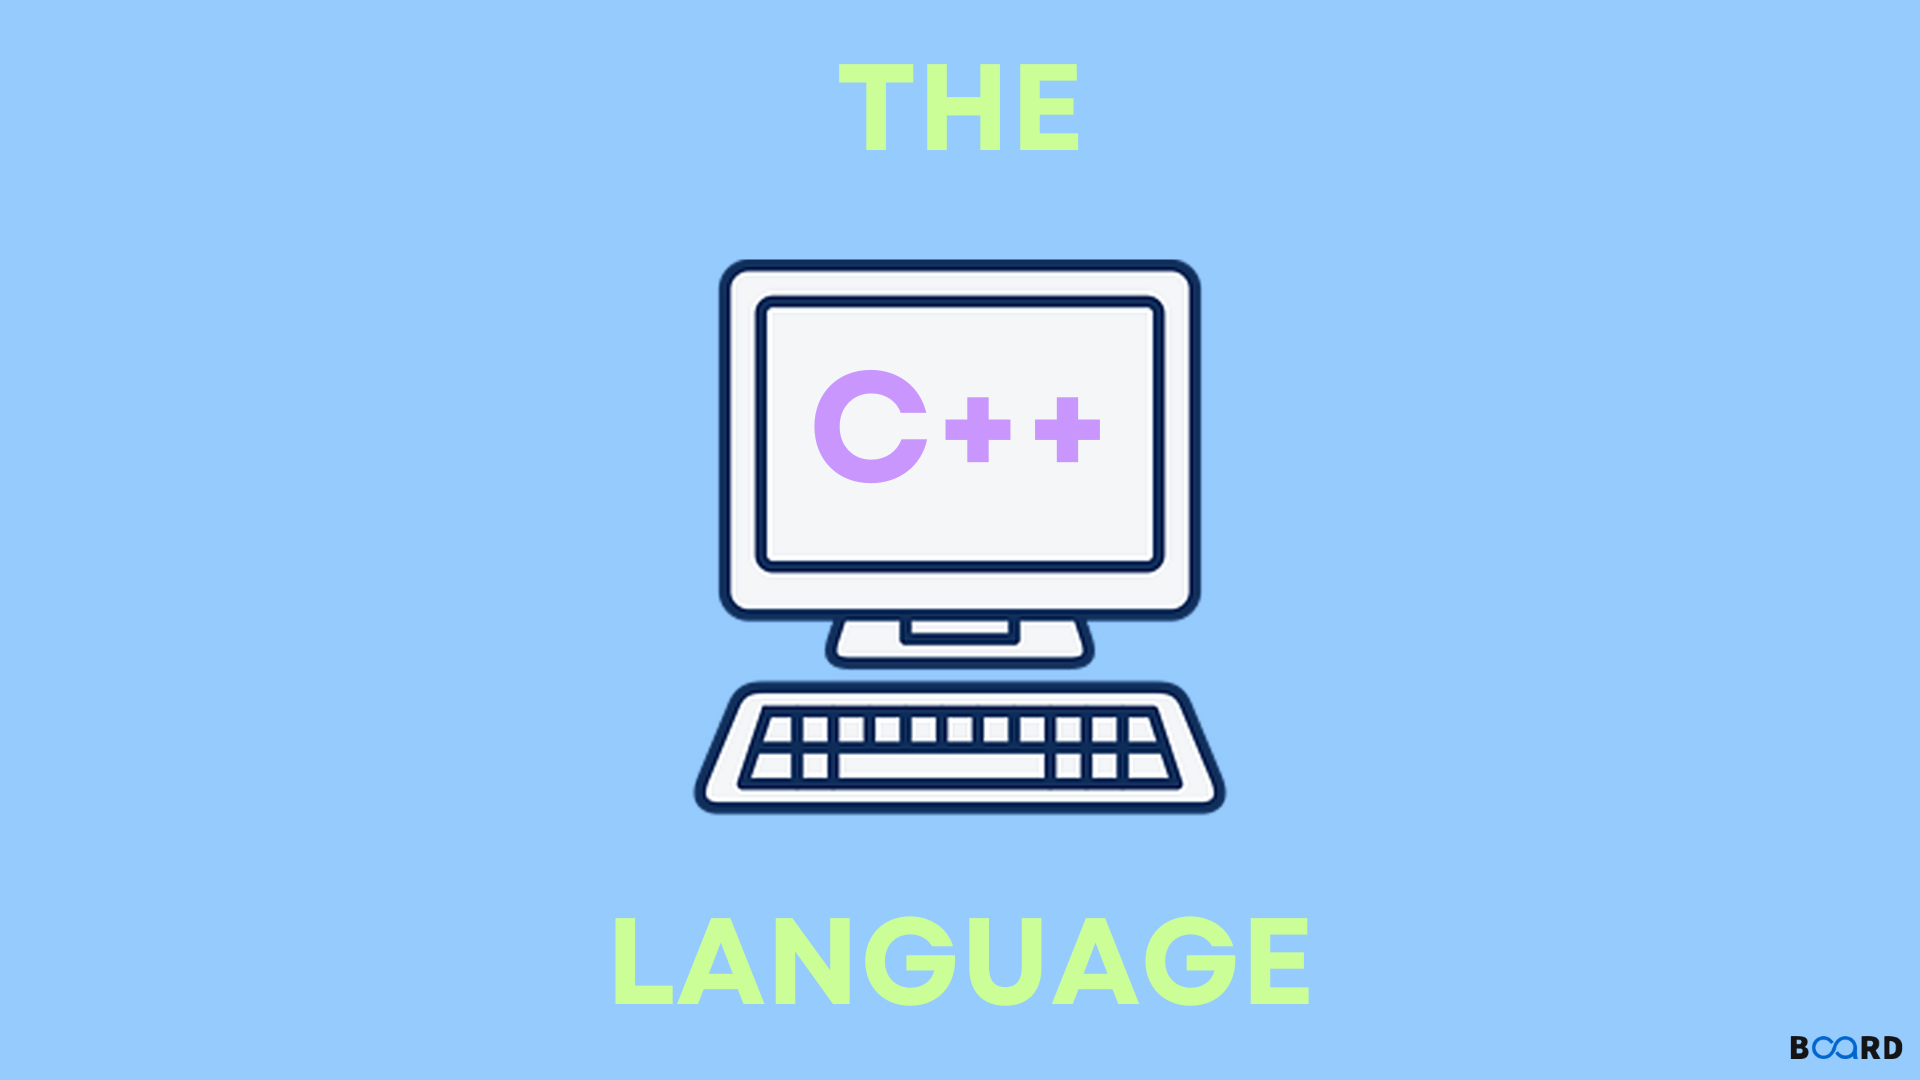 C++ Language: An Overview